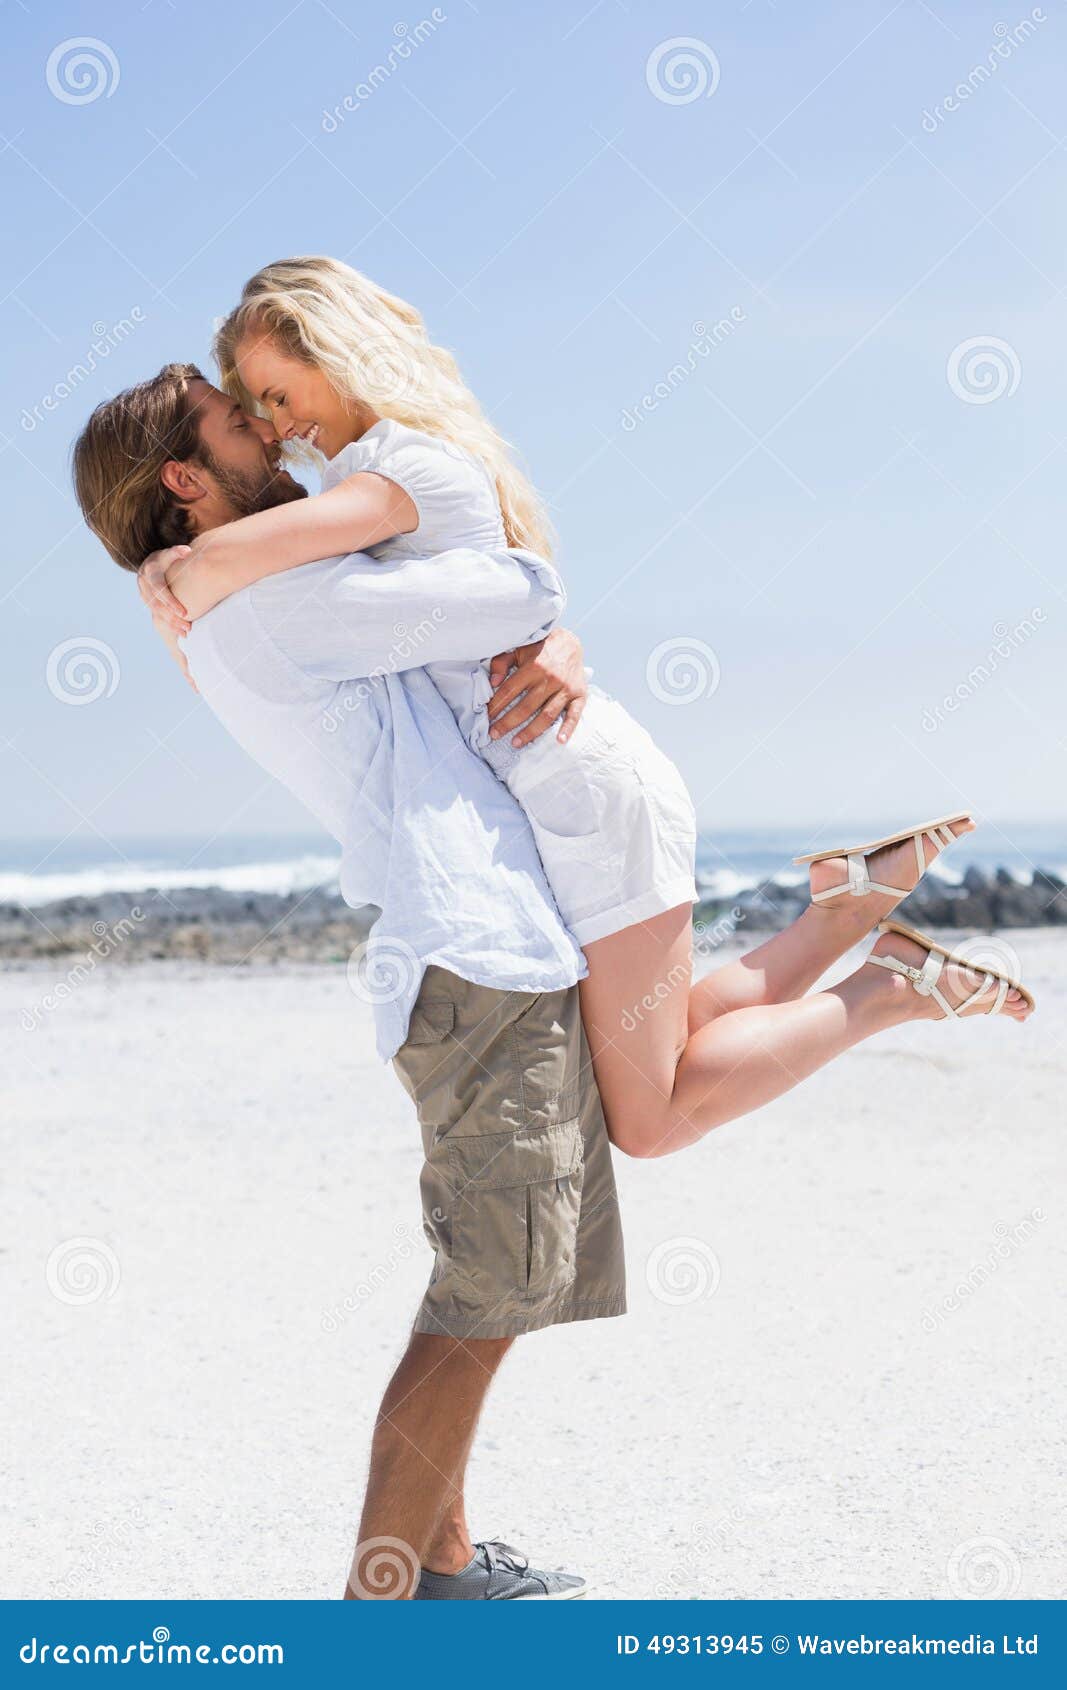 Cute Couple Hugging on the Beach Stock Image - Image of cheerful ...